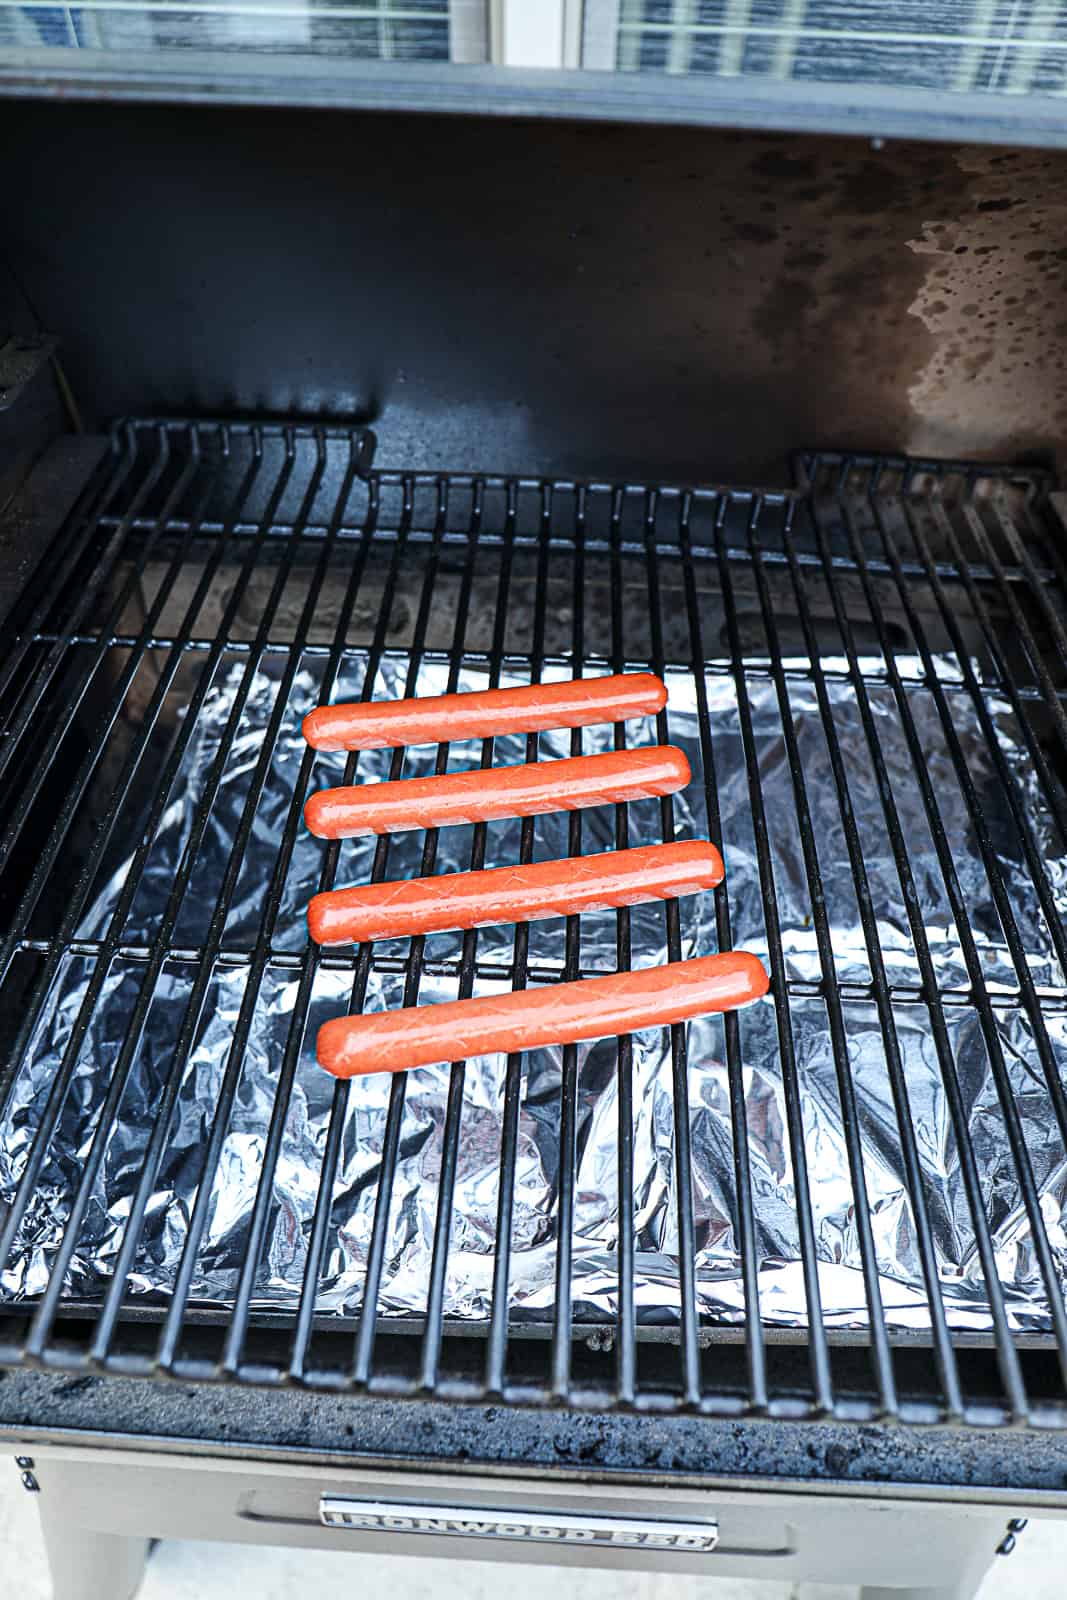 Smoking Scored Beef Hot Dogs On Traeger Pellet Grill Grates 